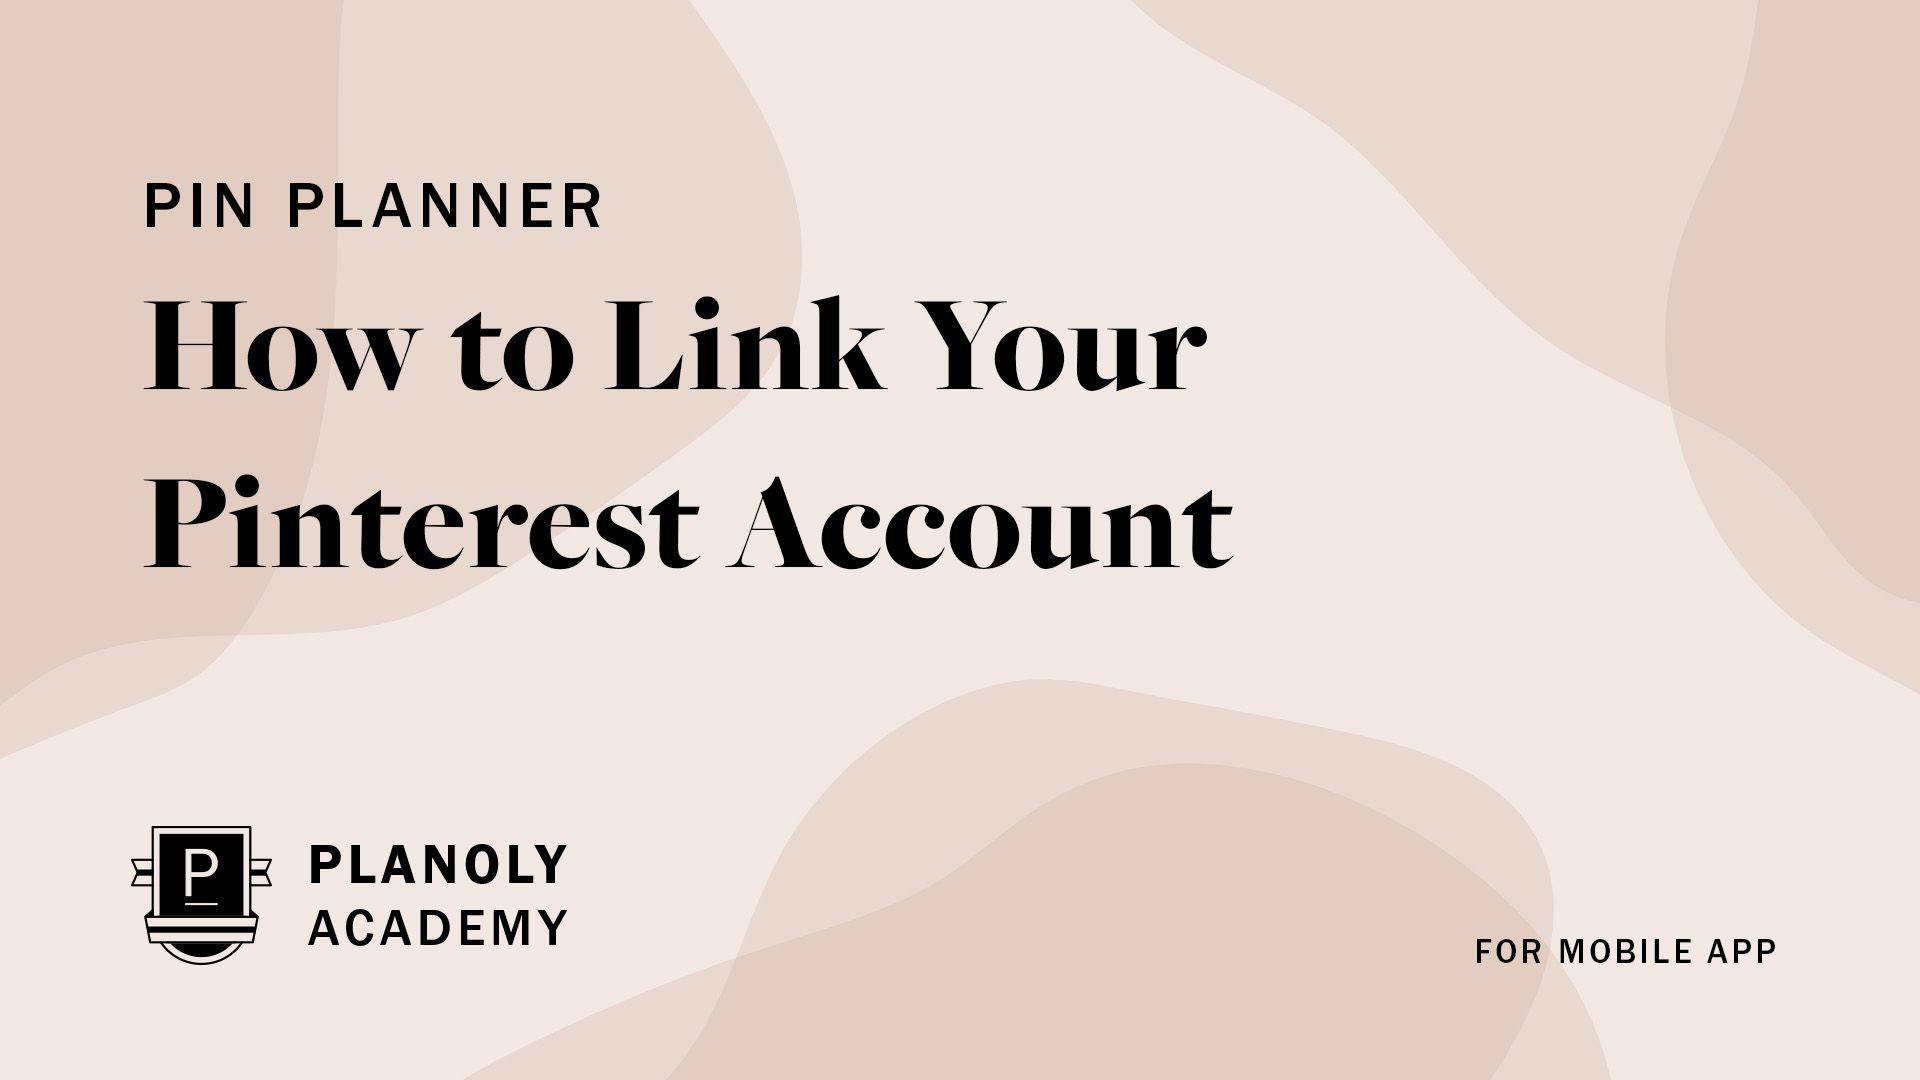 How to Link Your Pinterest Account